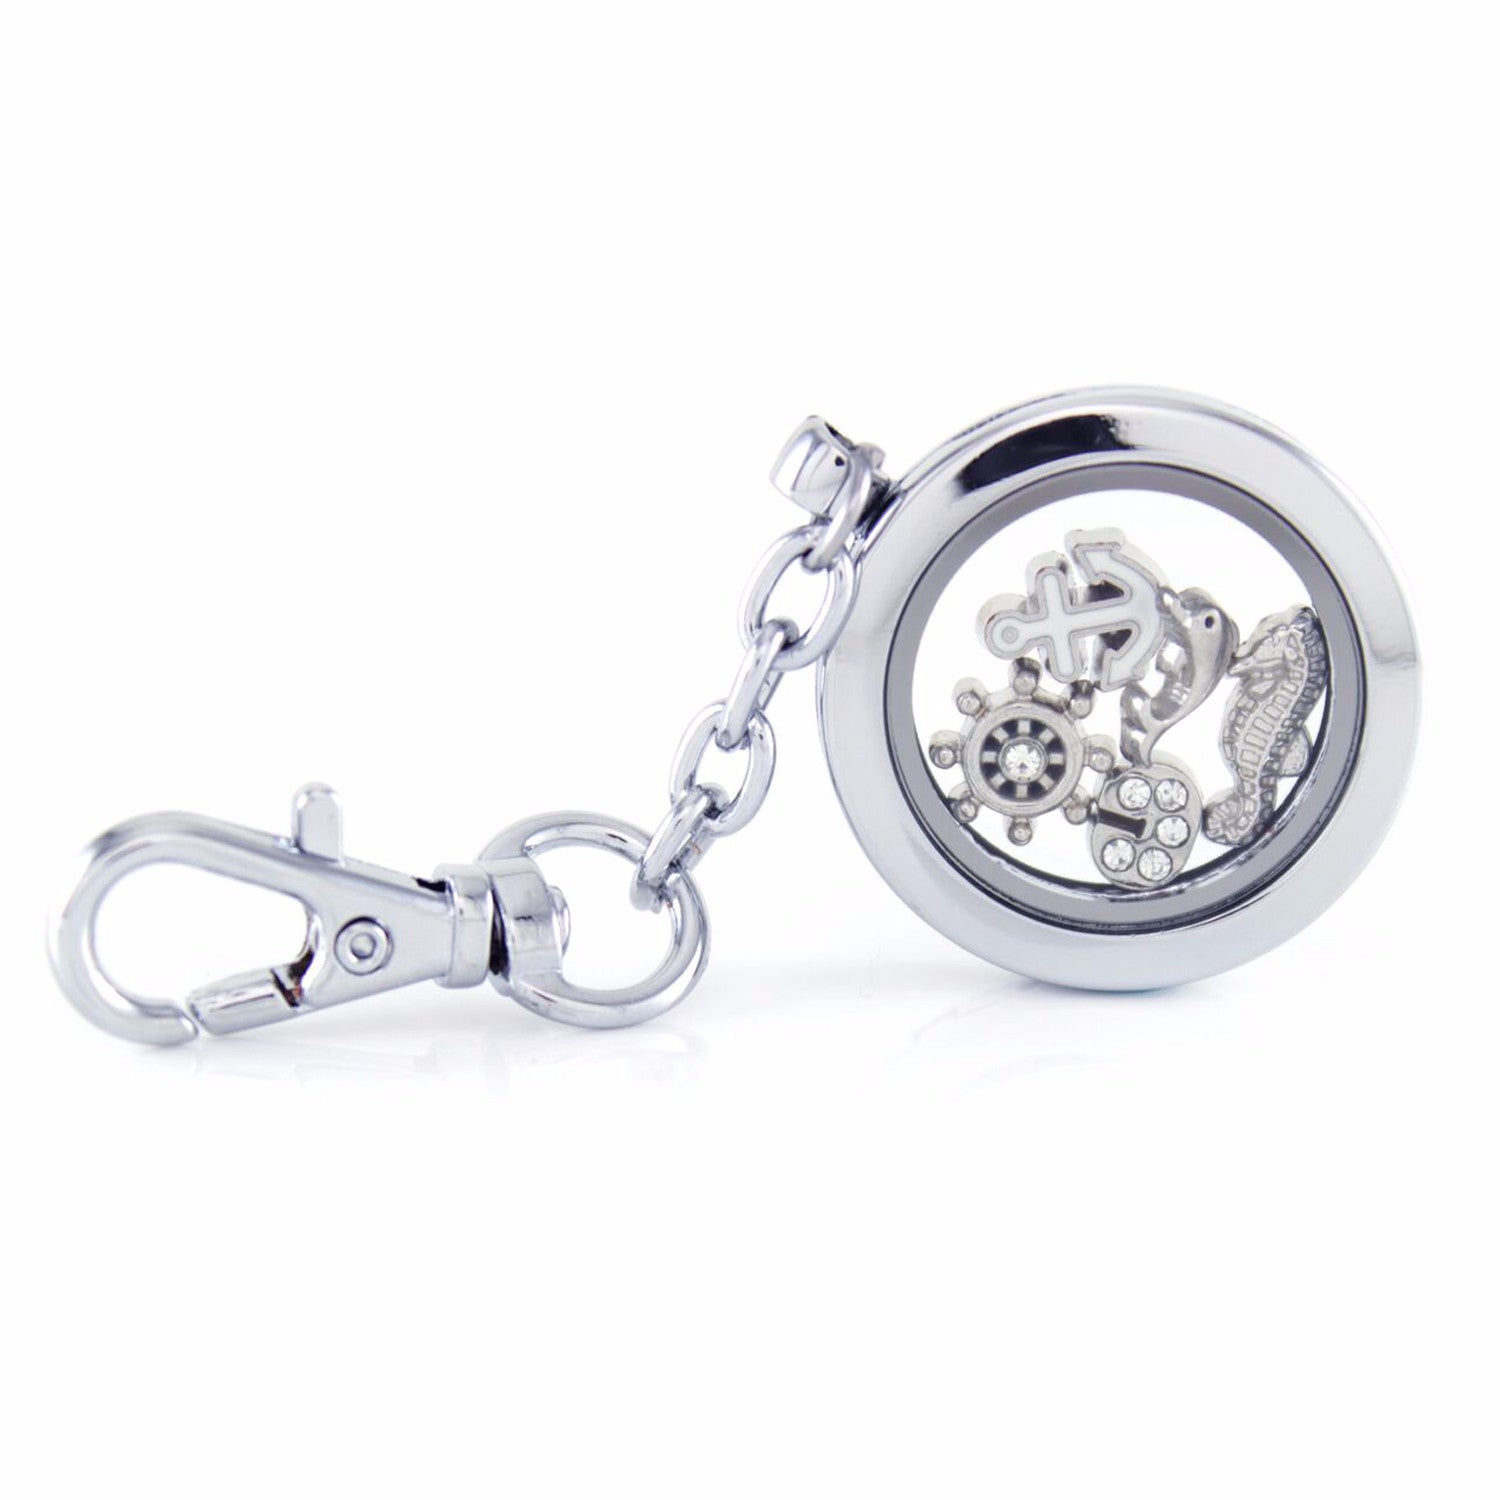 Silver Circle Floating Locket Keychain Includes 4 Charm Choices By BG247®